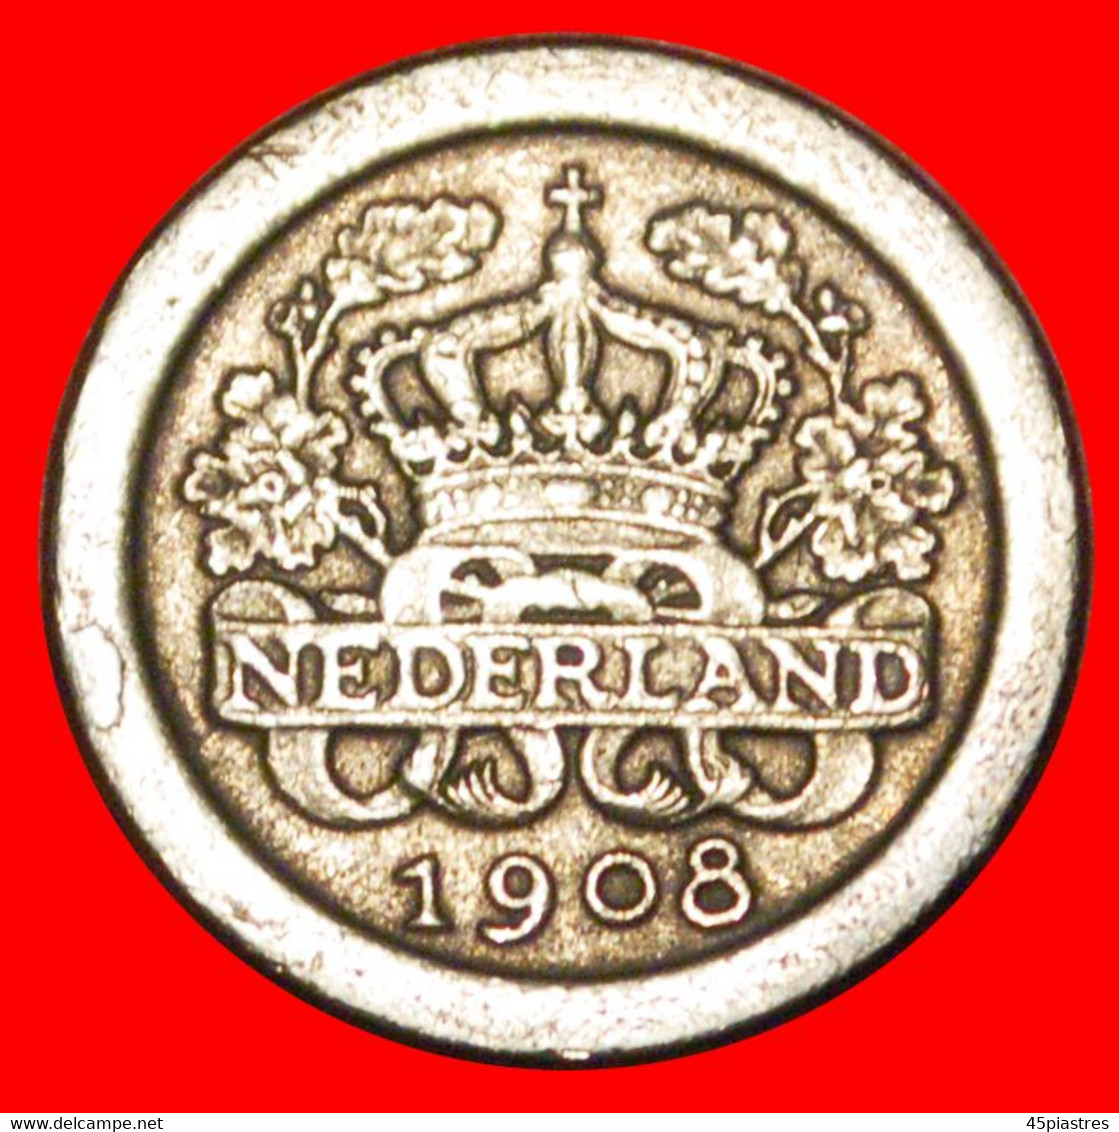 * CROWN AND OAK BRANCHES (1907-1909): NETHERLANDS ★ 5 CENTS 1908 UNCOMMON! WILHELMINA 1890-1948★LOW START ★ NO RESERVE! - 5 Centavos